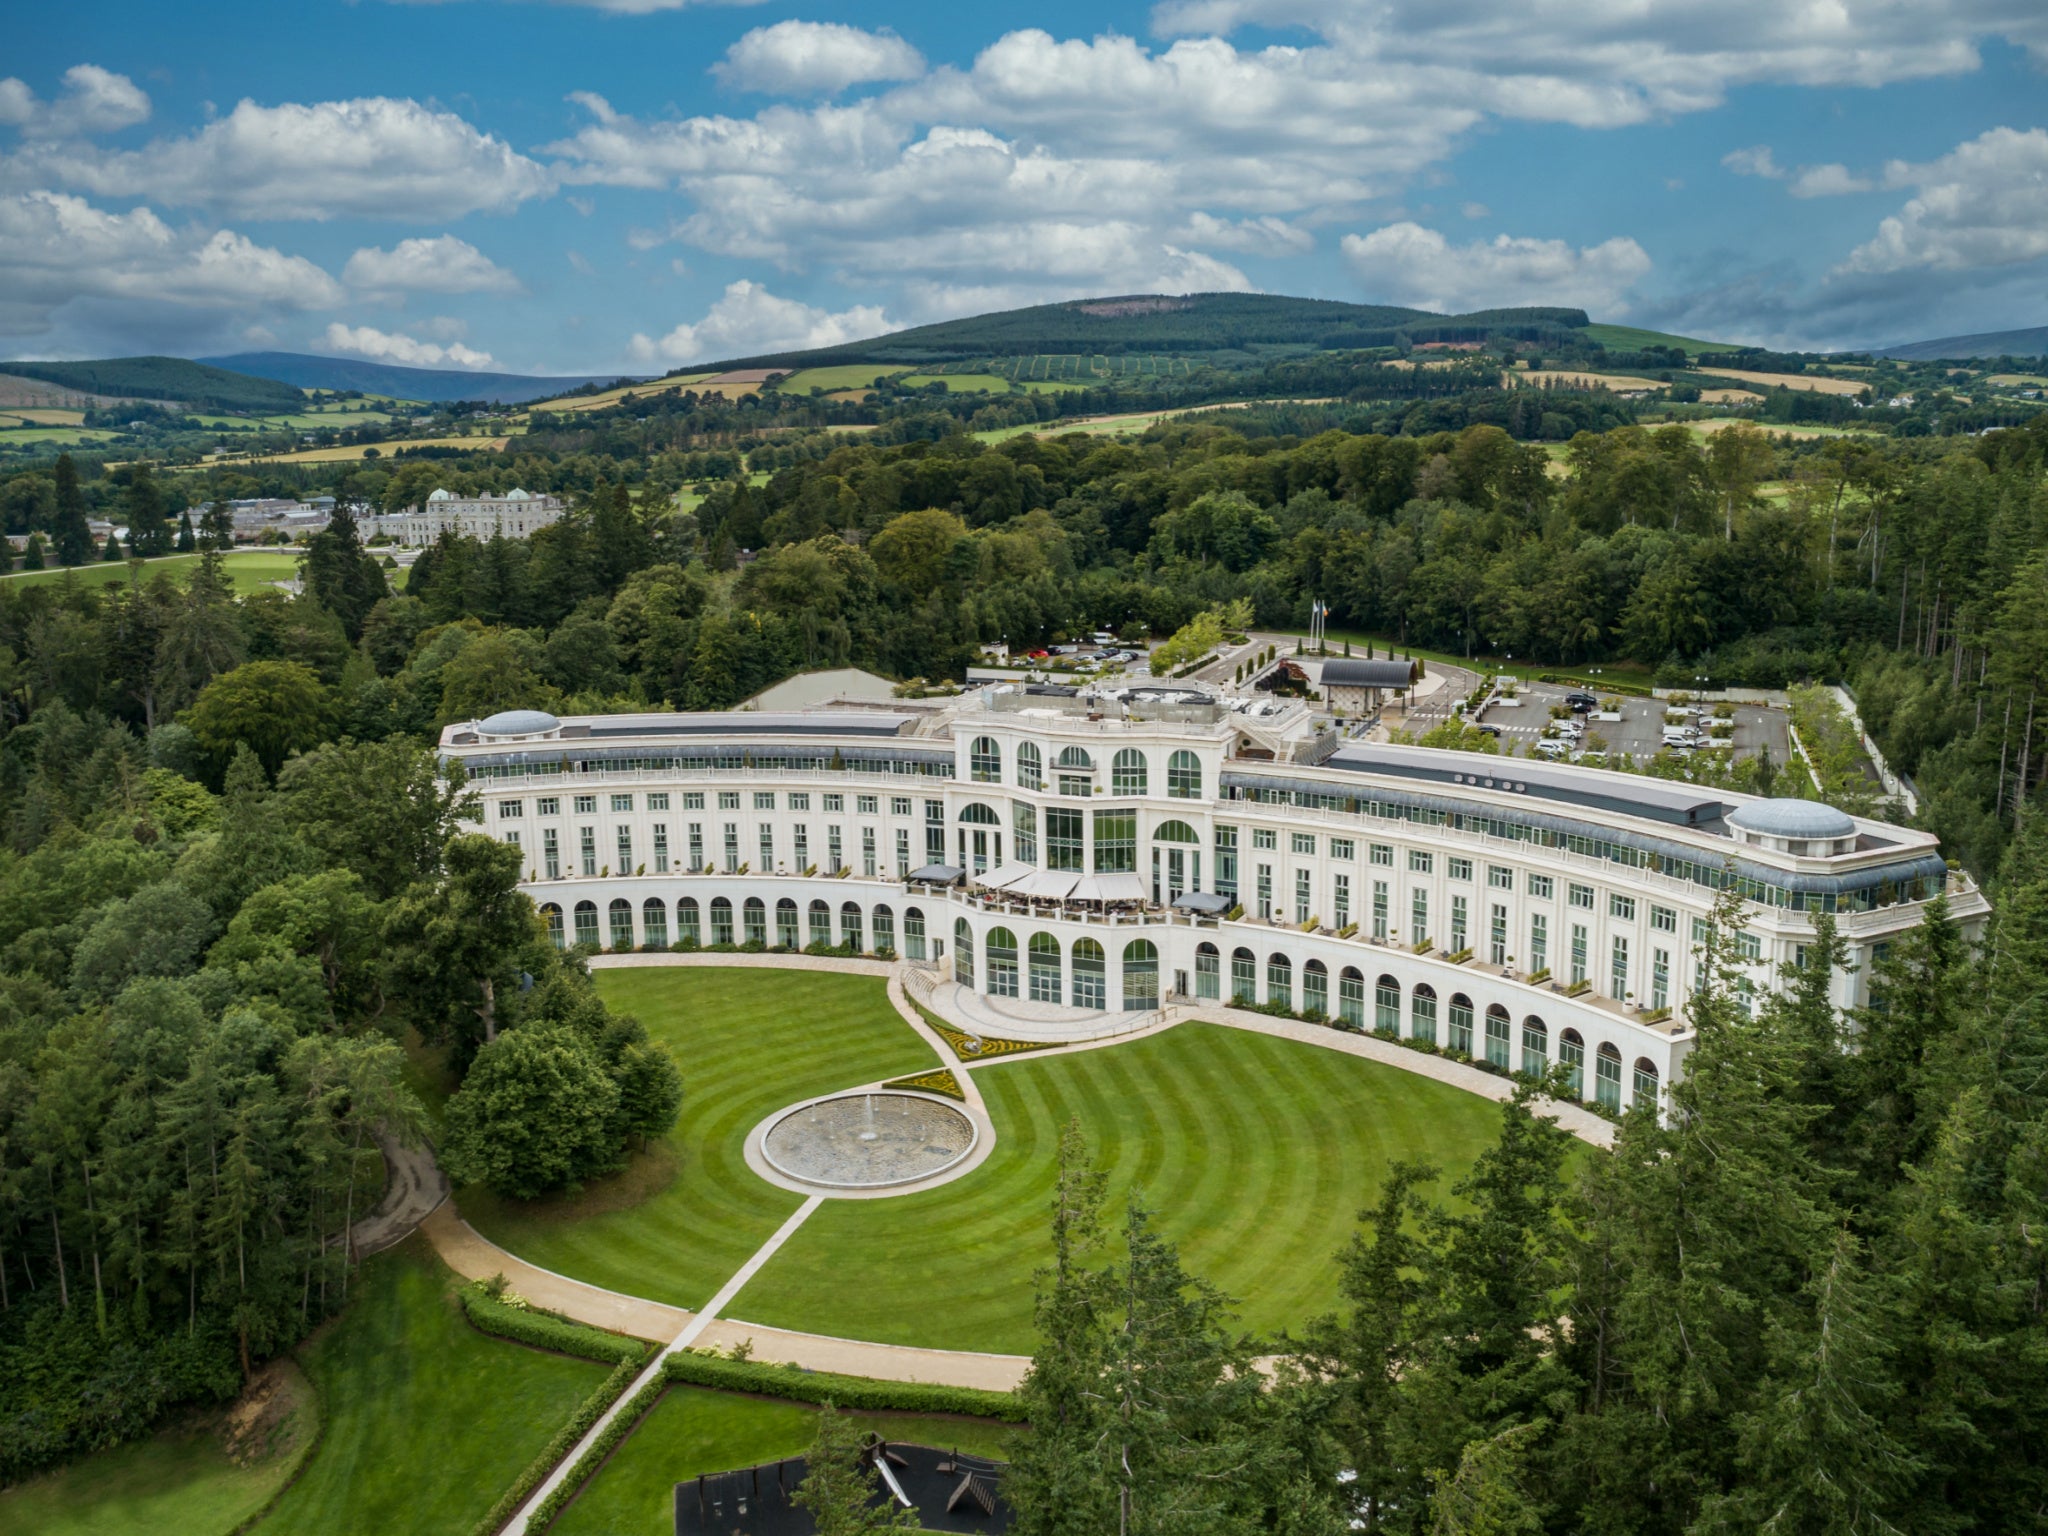 This Palladian-style hotel has a fancy spa, a few miles from the famous Powerscourt waterfall